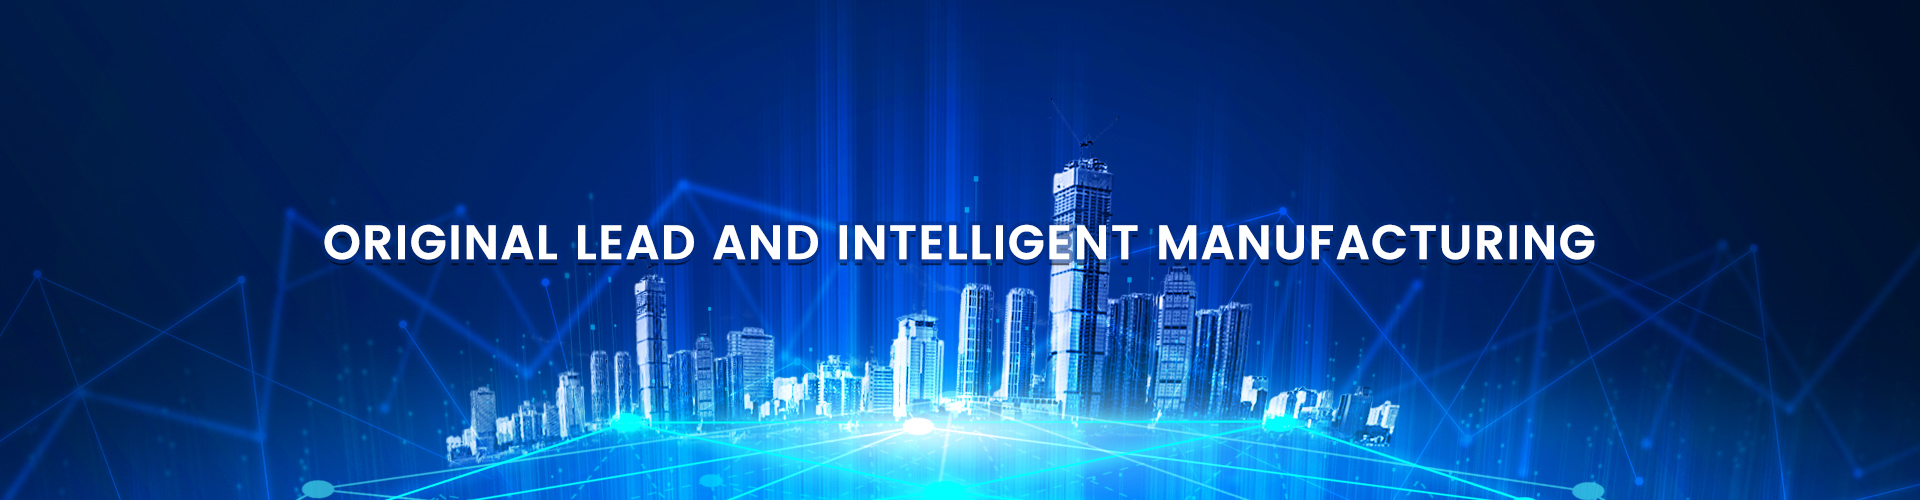 Original Lead and Intelligent Manufacturing Banner 02